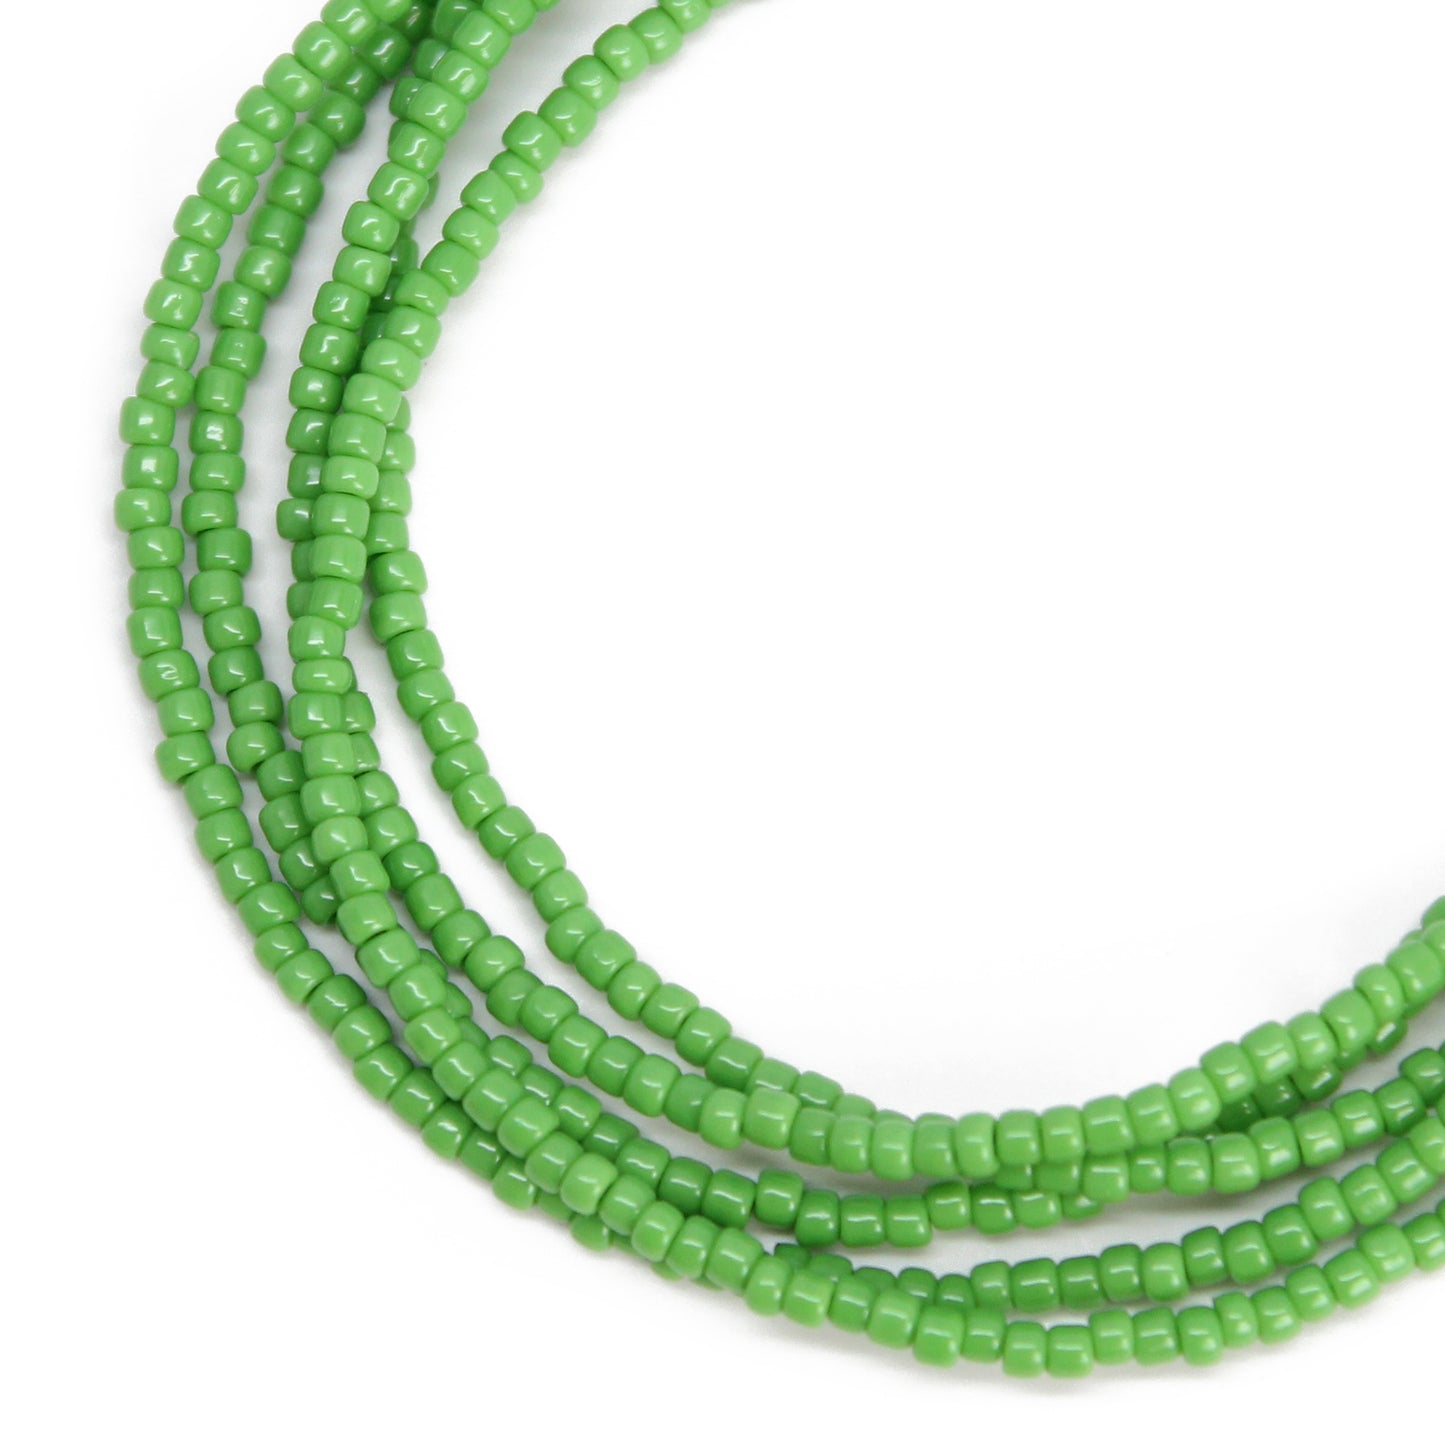 Mint Green Seed Bead Necklace, Thin 1.5mm Single Strand